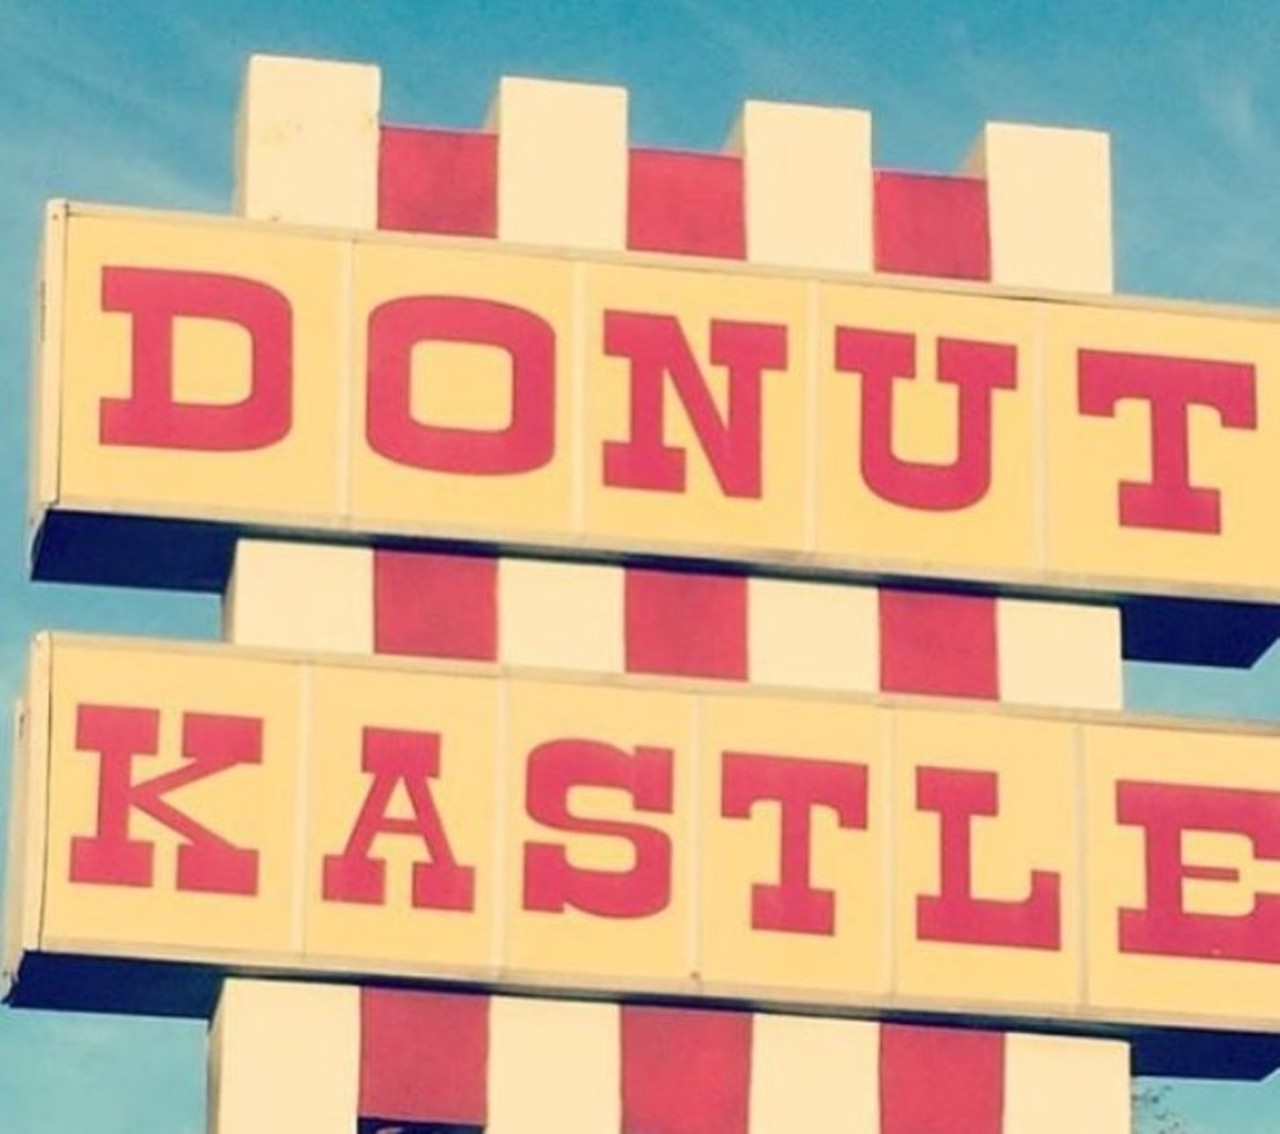 Donut Kastle
24555 Eureka Rd., Taylor; 734-946-8436
Not to be confused with the Castle in Warren, Donut Kastle boasts the best donuts downriver. Order a giant apple fritter with a dollop of vanilla ice cream if you&#146;re feeling especially indulgent. 
Photo courtesy of Instagram user wundreland